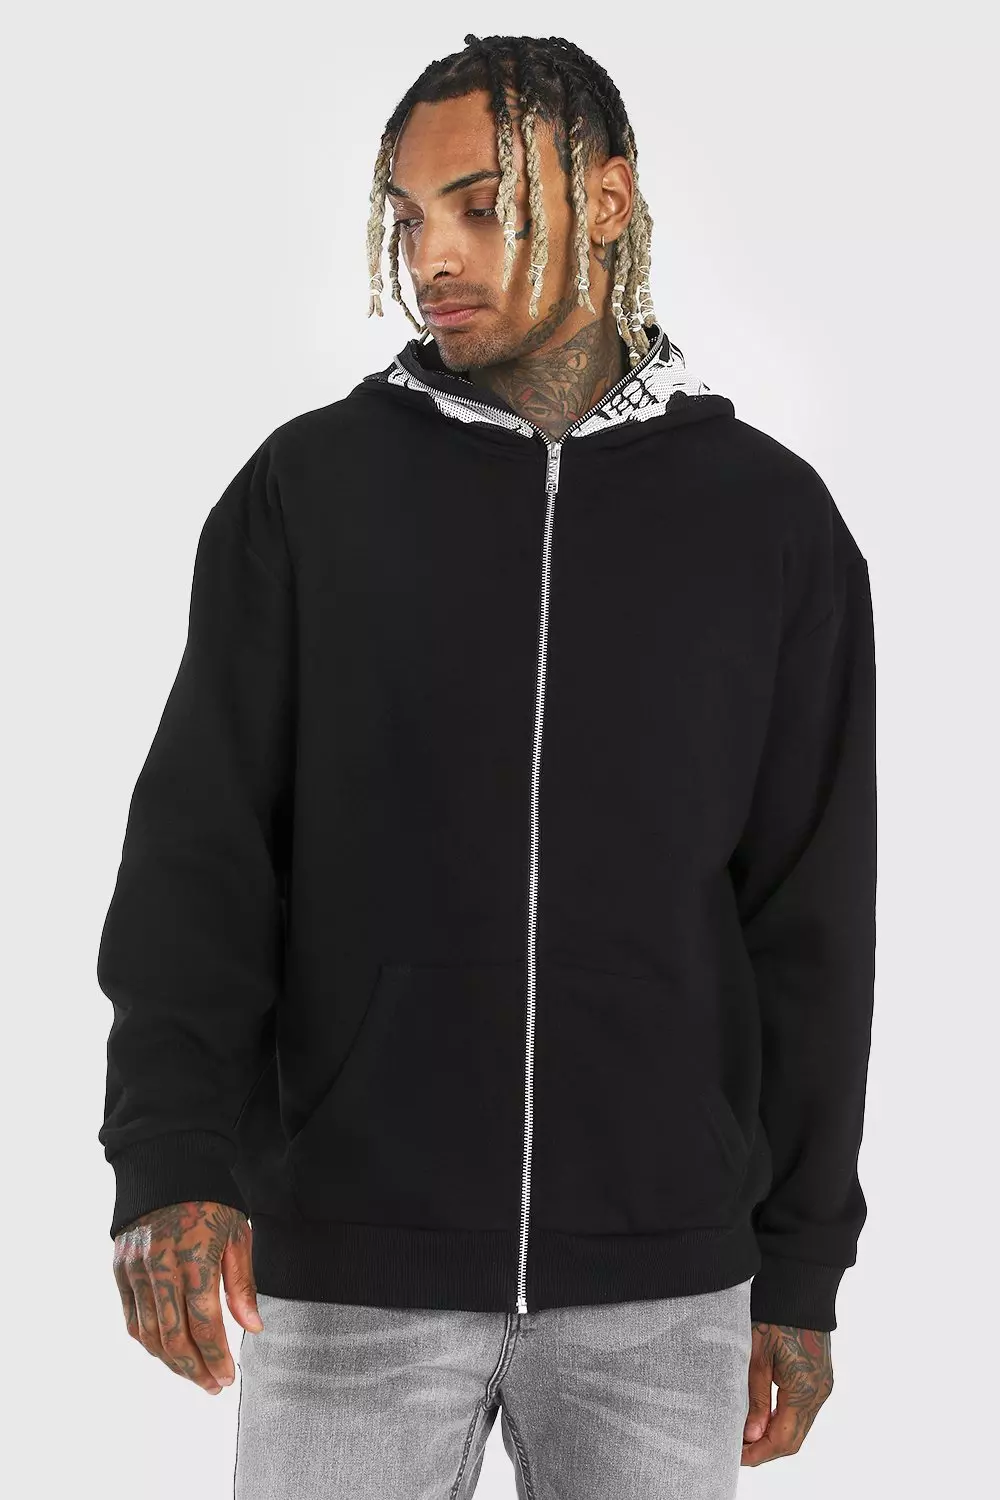 Oversized Skull Zip Through Hoodie With Mesh Face